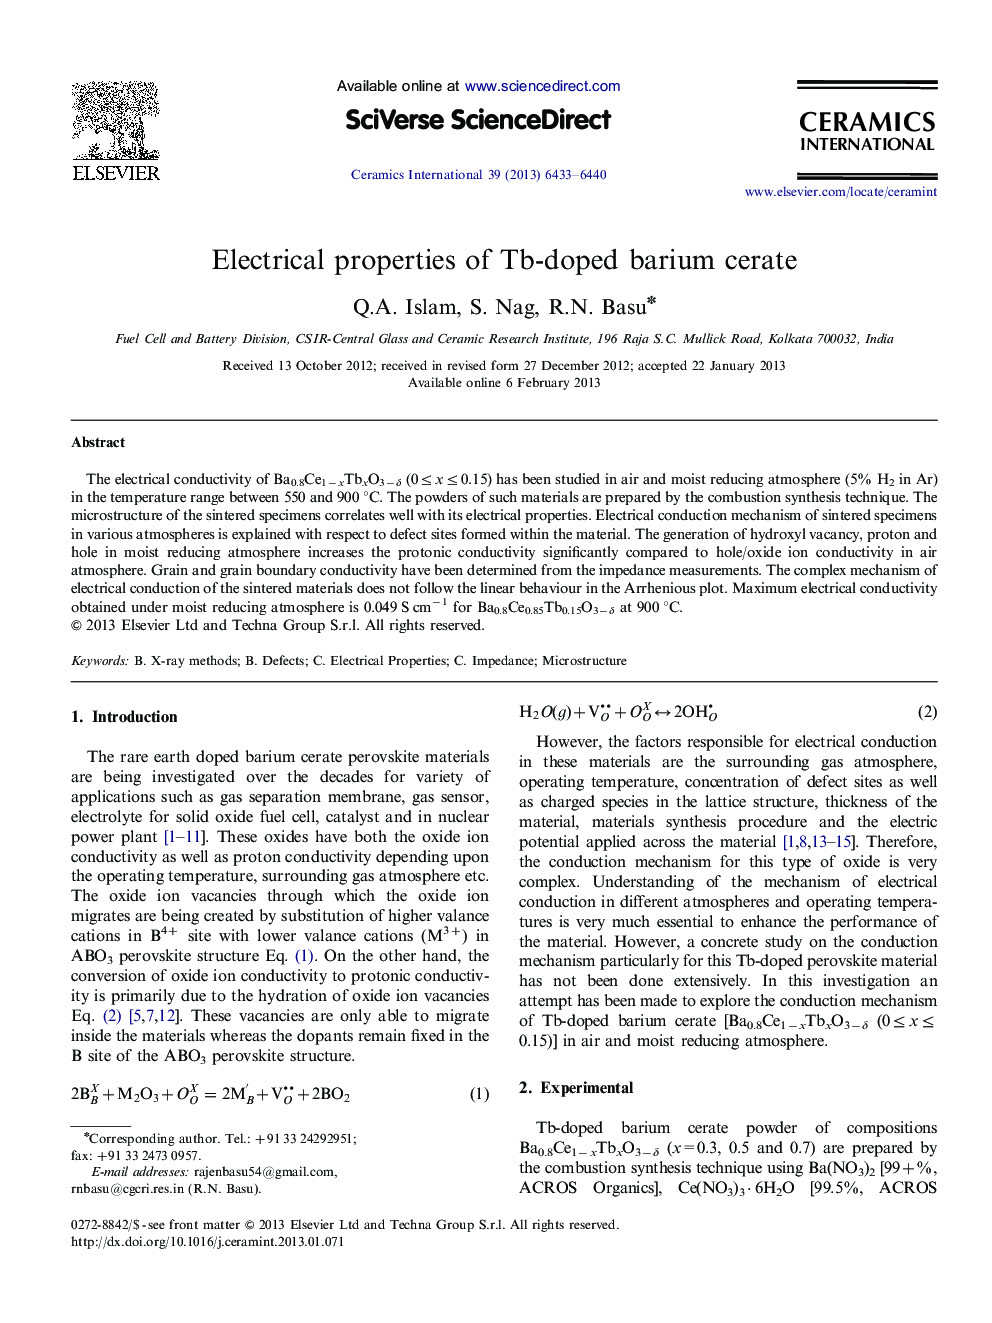 Electrical properties of Tb-doped barium cerate